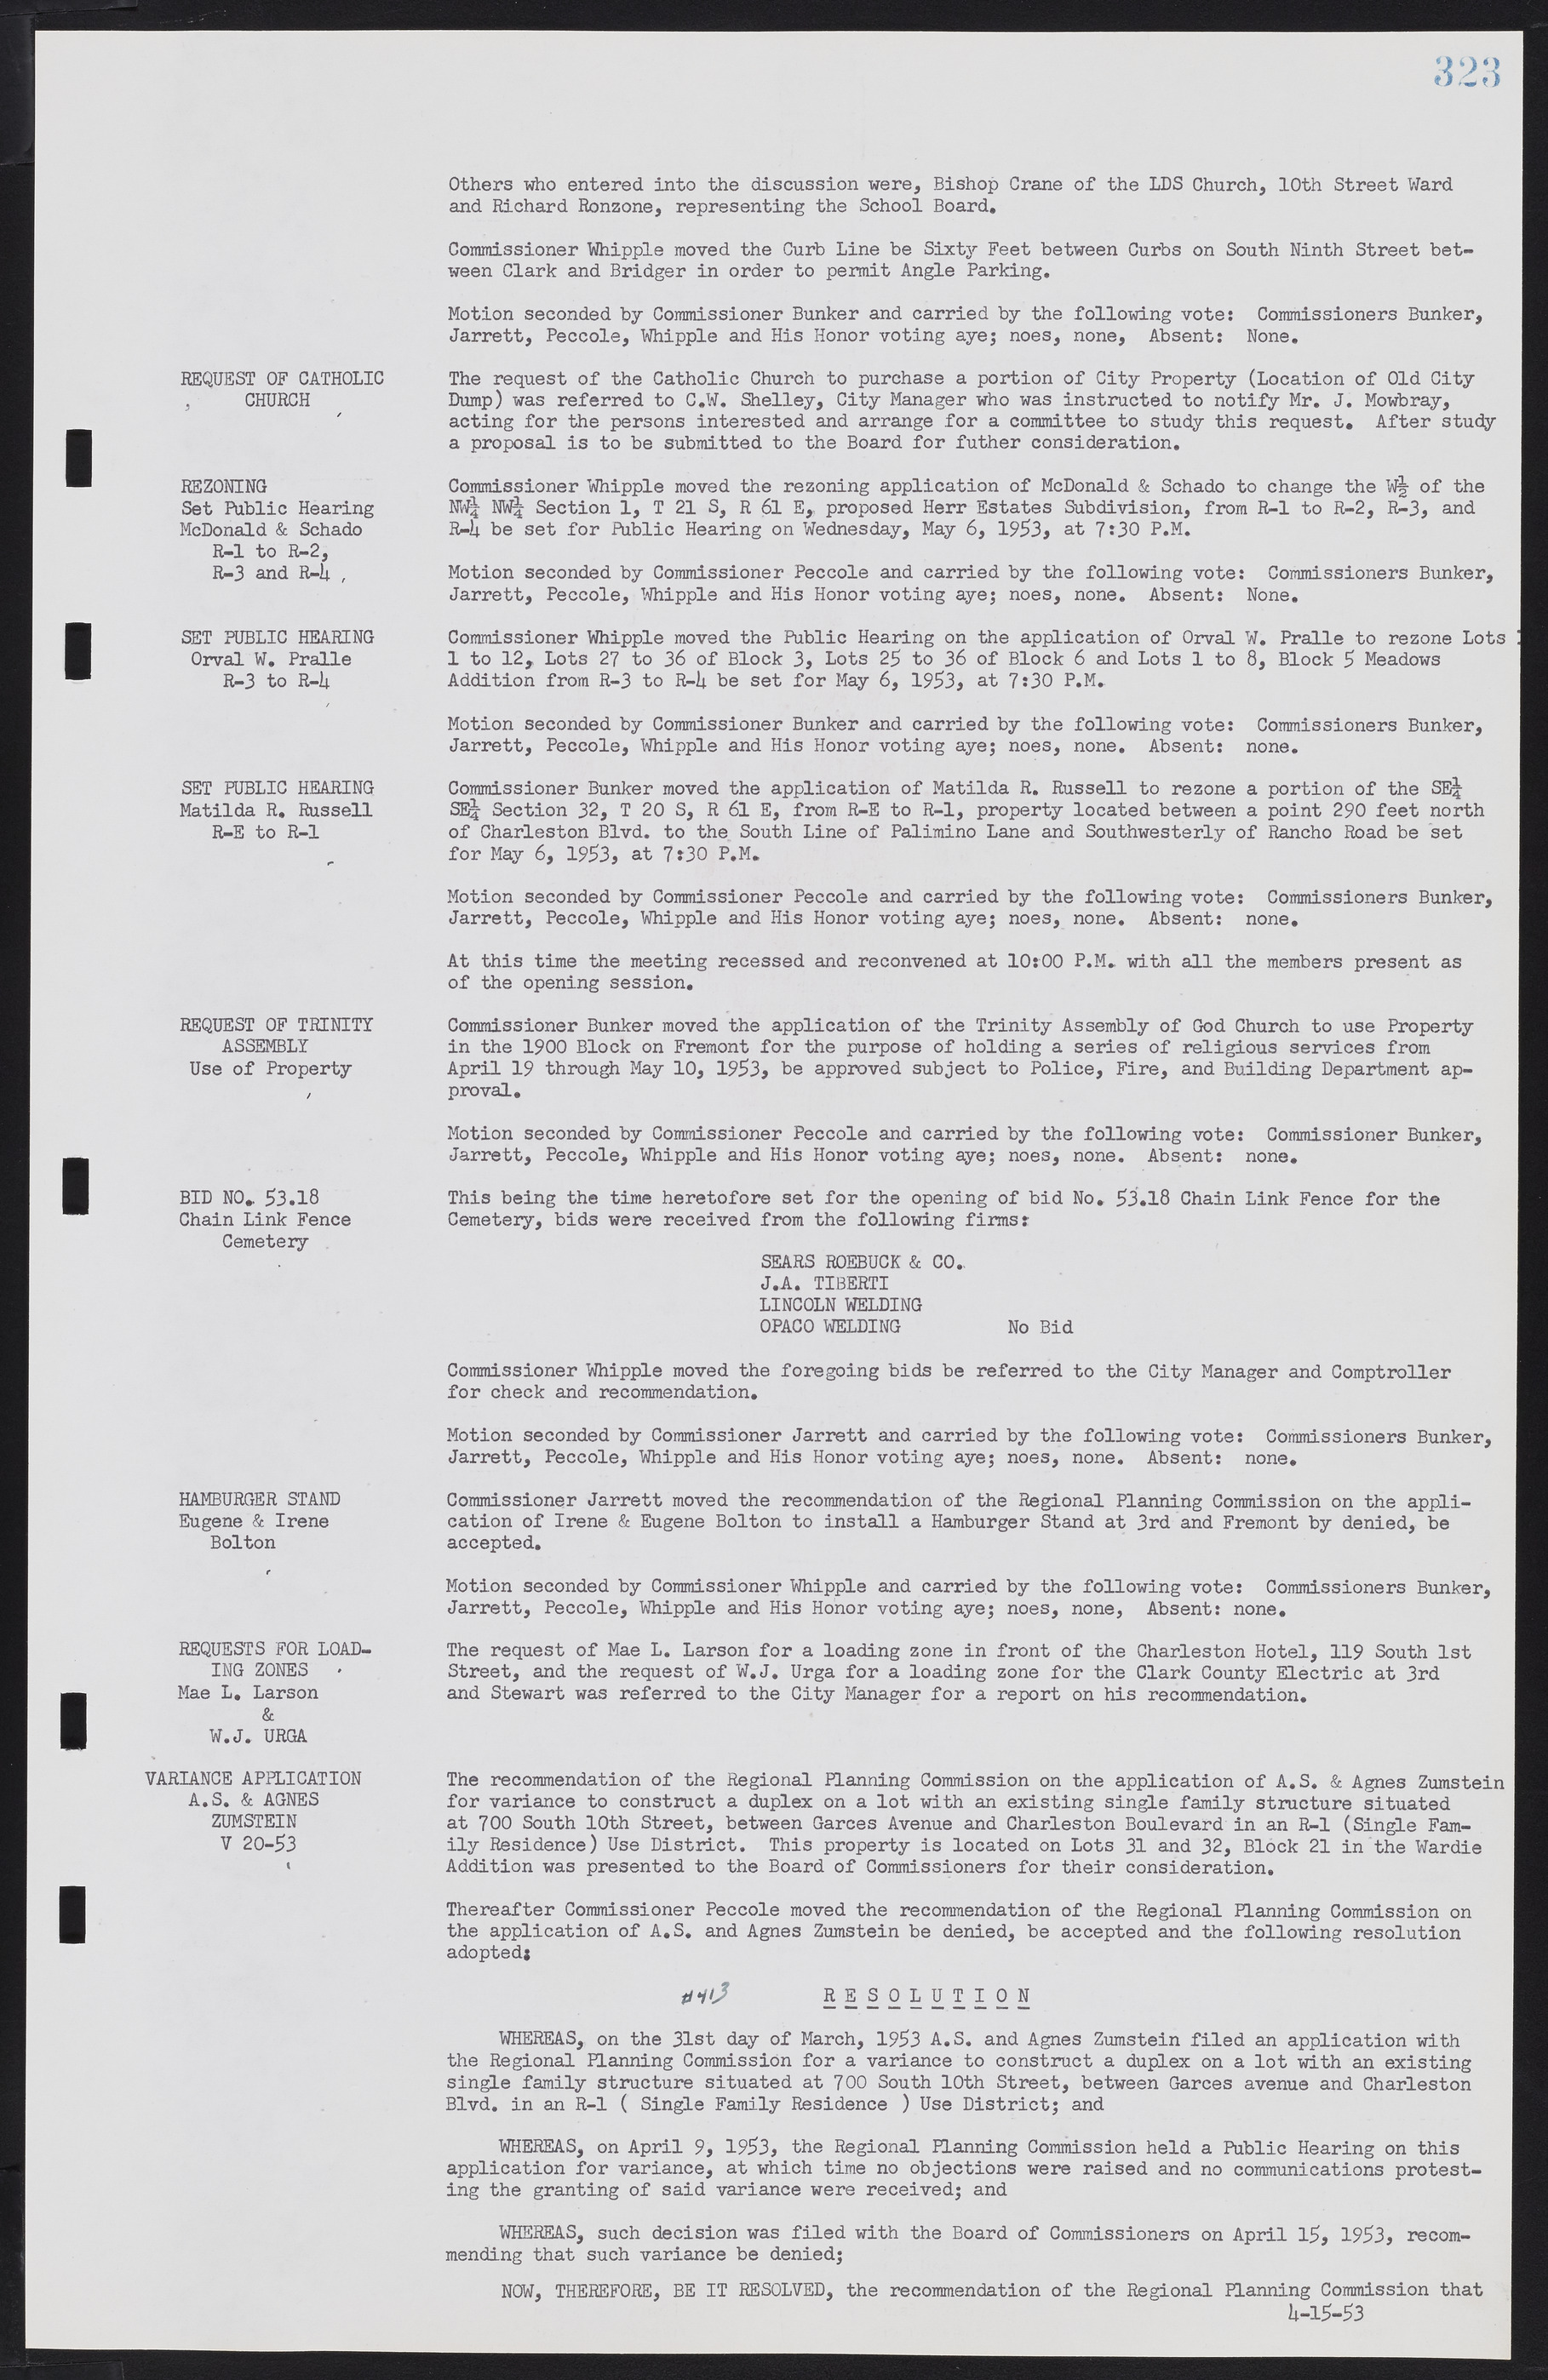 Las Vegas City Commission Minutes, May 26, 1952 to February 17, 1954, lvc000008-351